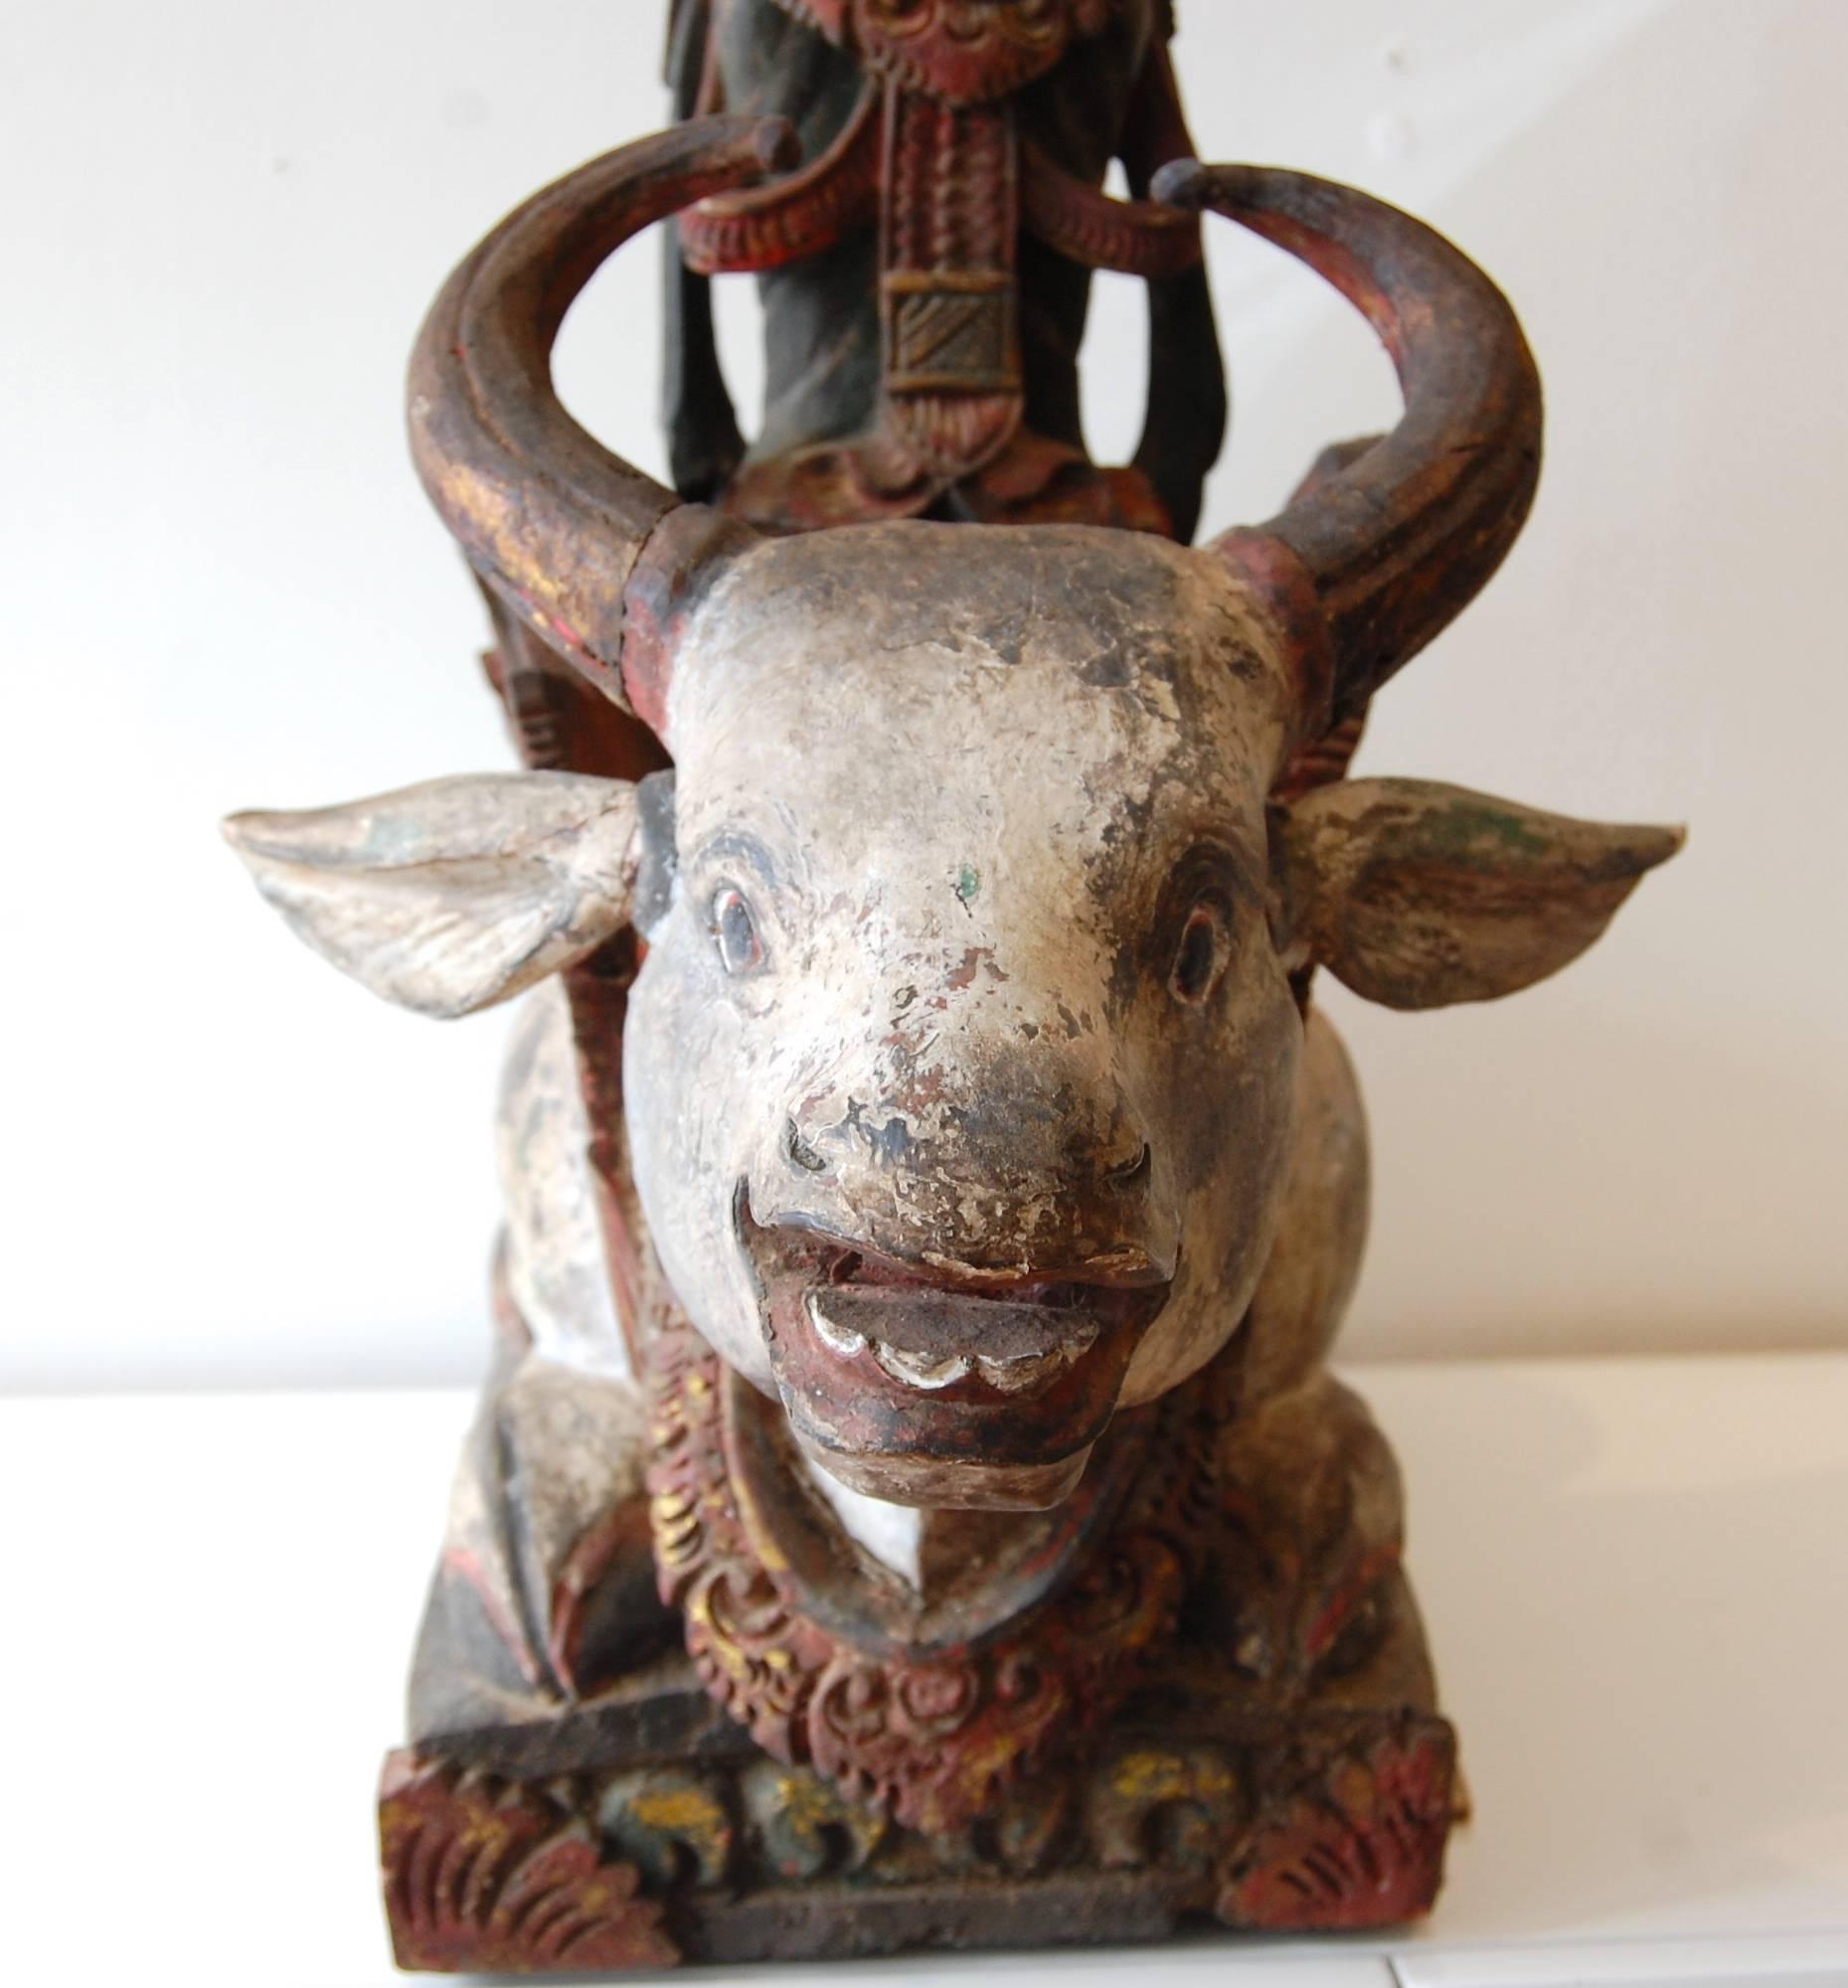  19th Century Shiva Standing On The Bull Nandi Wood Carving with polychrome paint.
 27